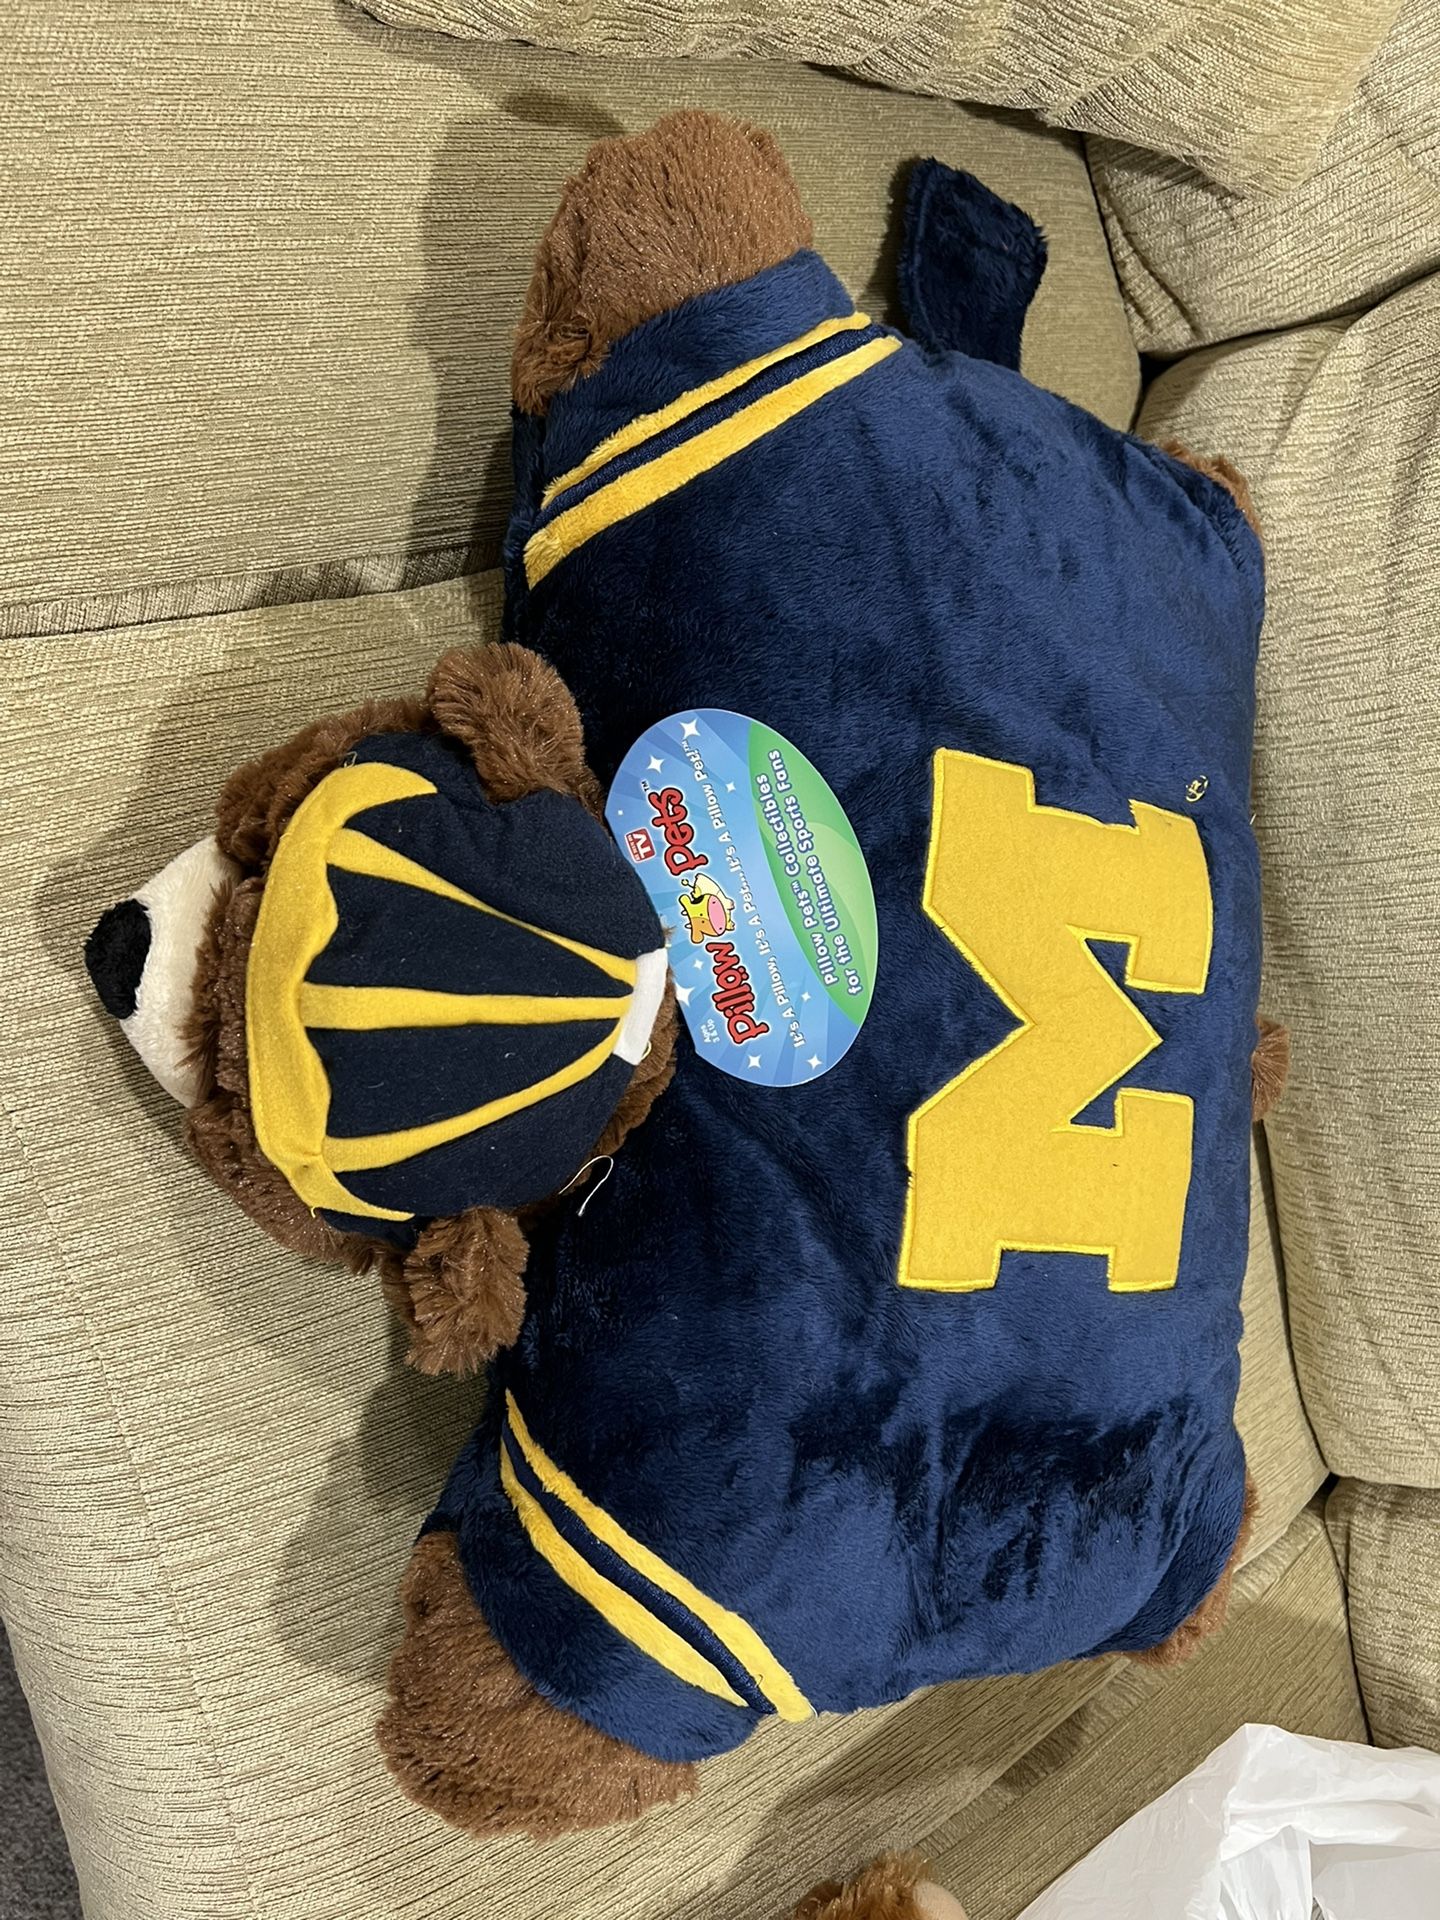 Michigan Pillow Squishi Pet Or Michigan Sling Back Pack .both For $35 Or $20 EachOr 20 